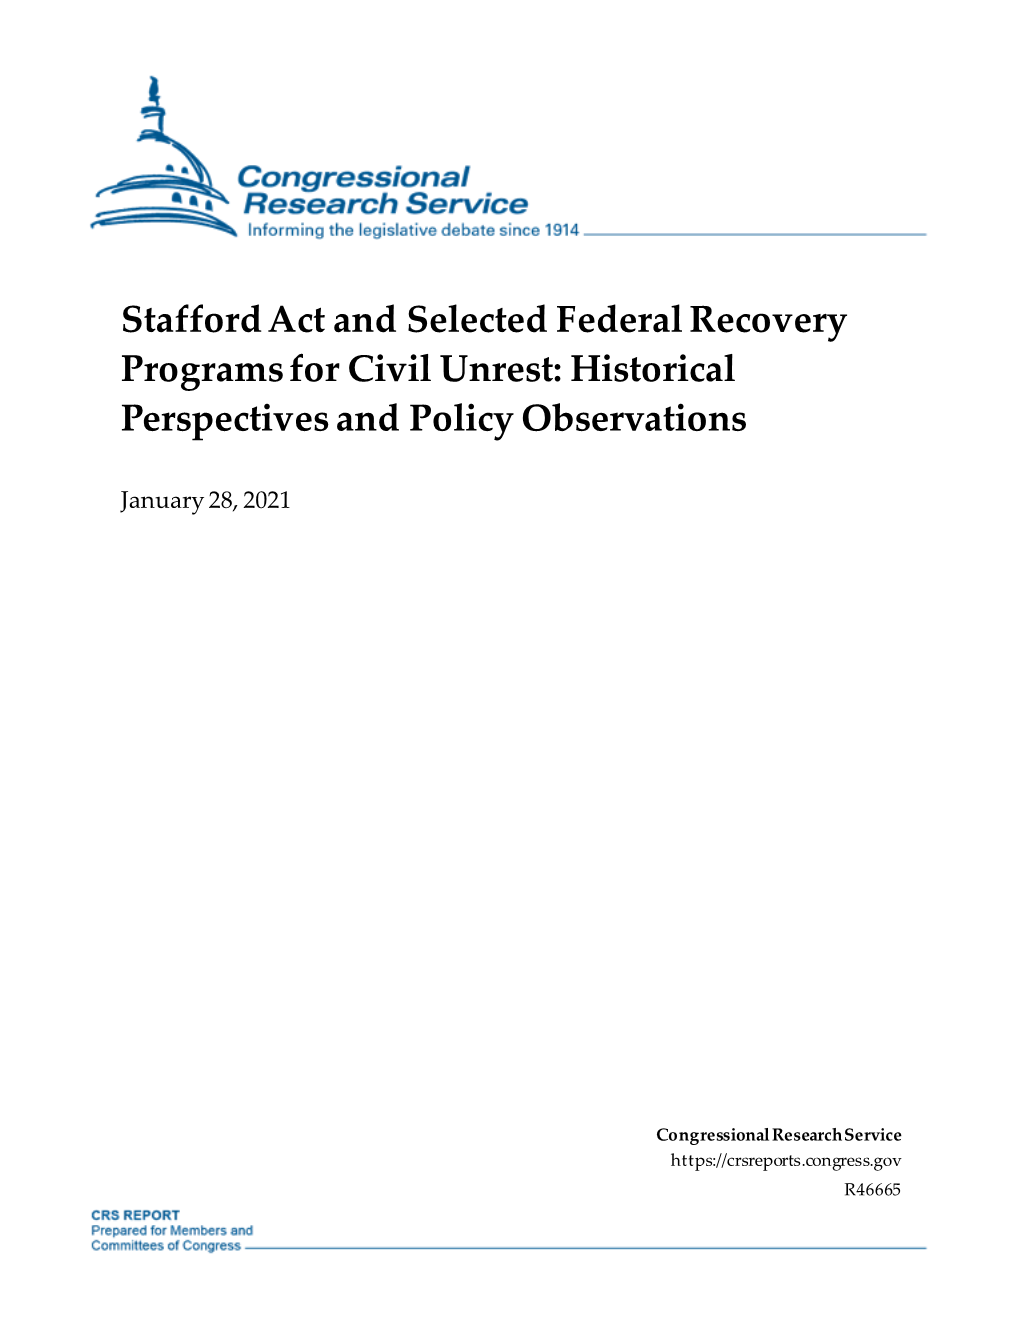 Stafford Act and Selected Federal Recovery Programs for Civil Unrest: Historical Perspectives and Policy Observations